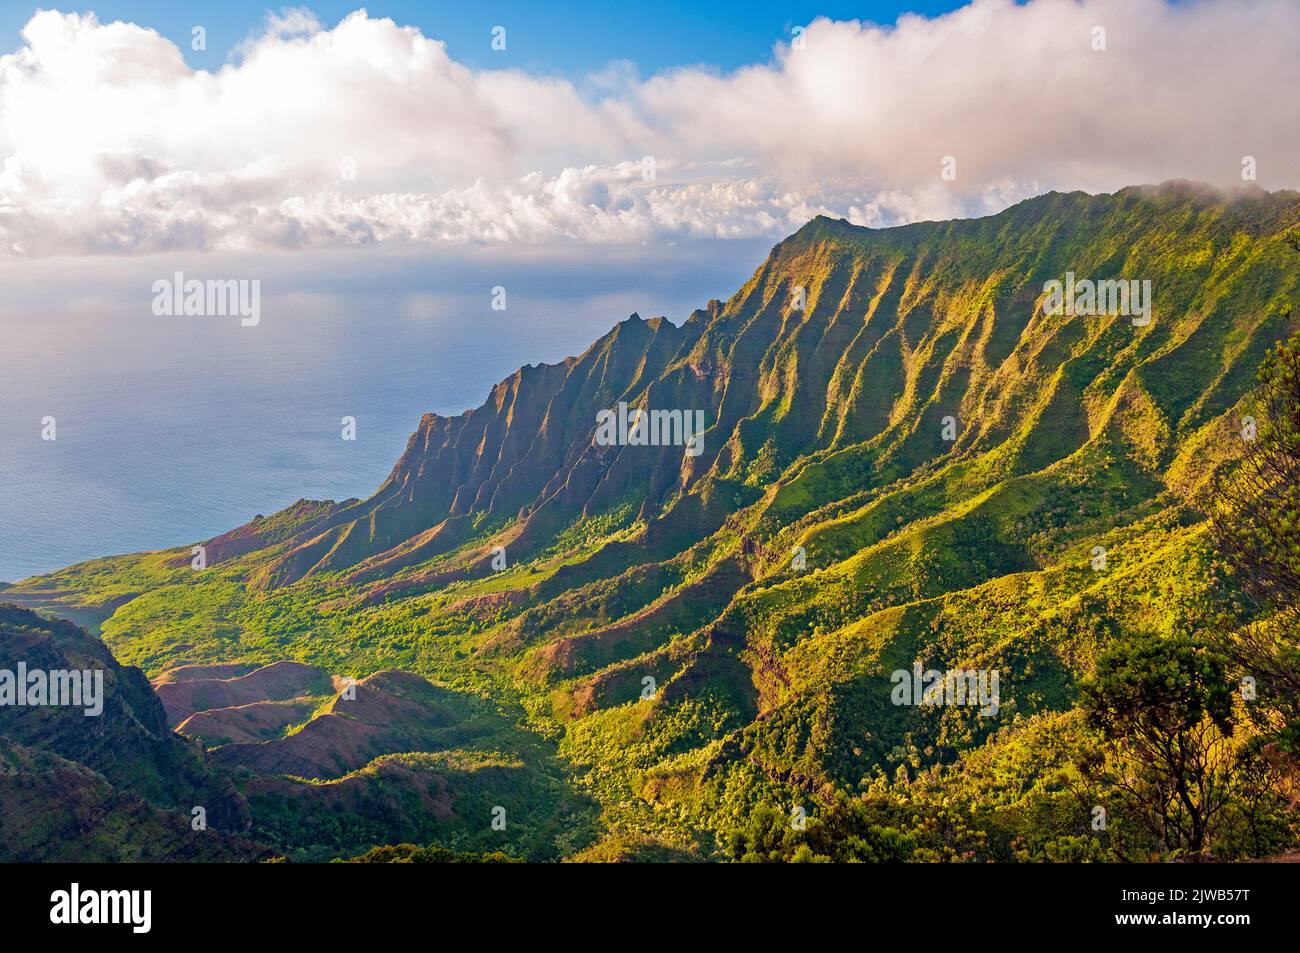 Evening Light on a Tropical Valley in the Kalalau Valley on Kauai Stock Photo